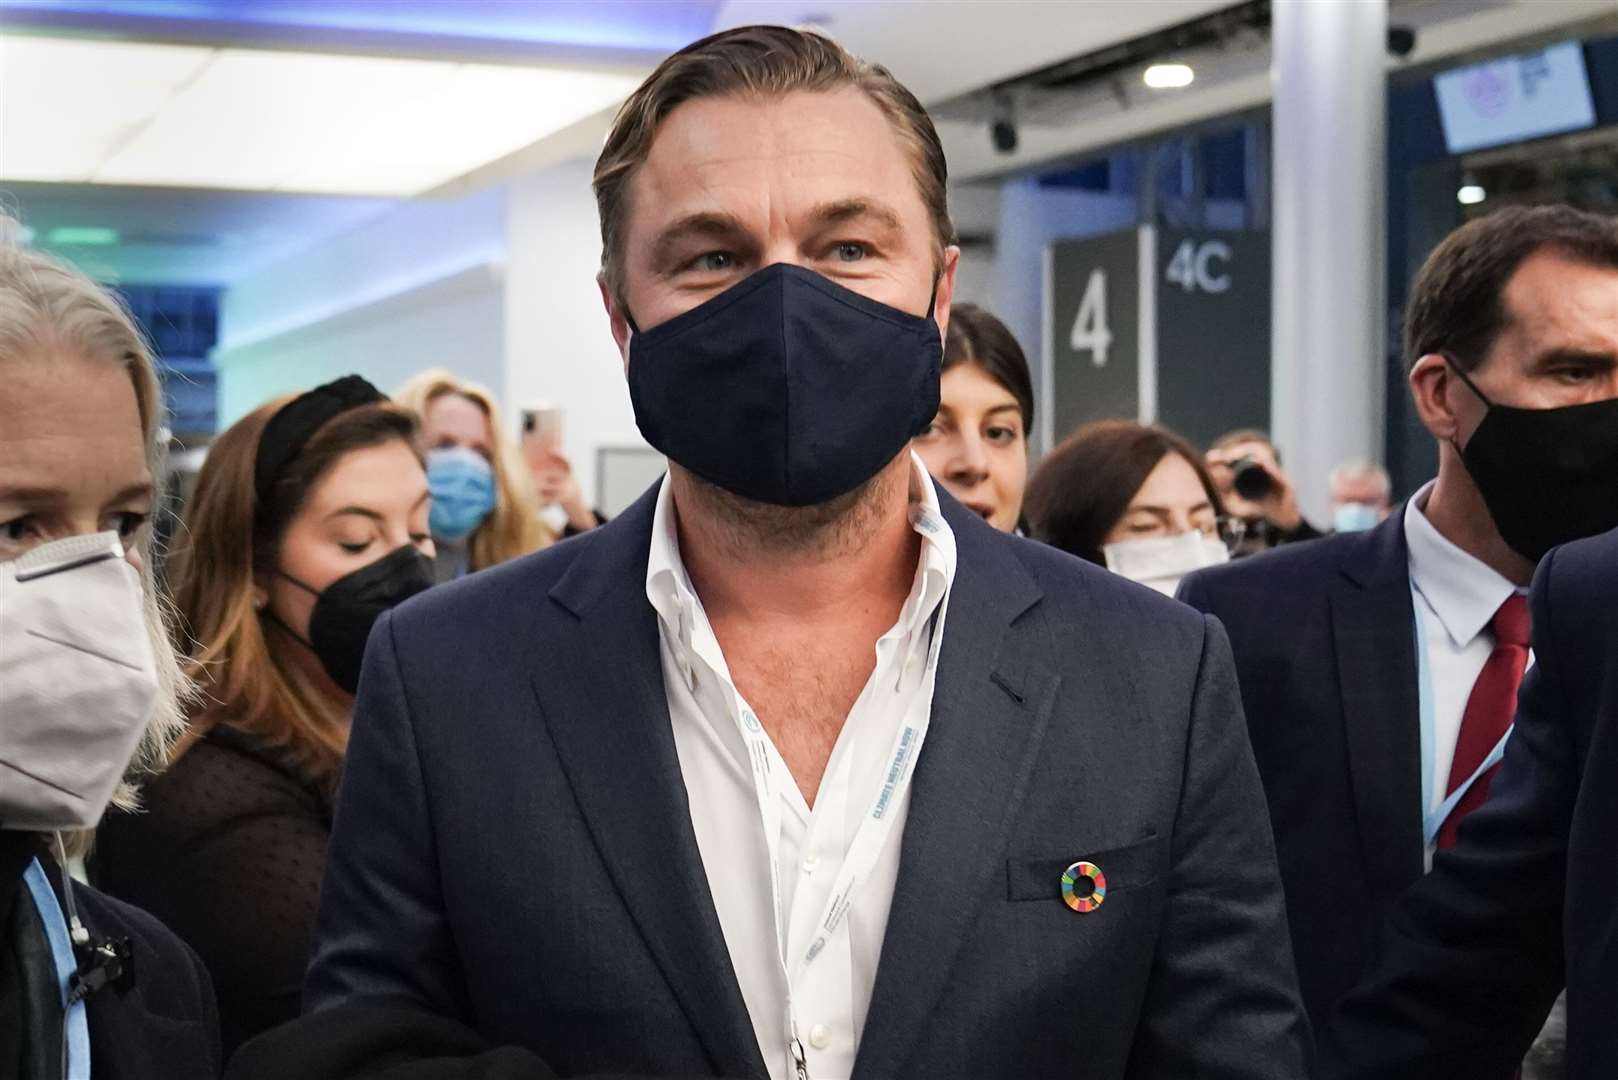 Leonardo DiCaprio attends an event at the Cop26 summit in Glasgow in 2021 (Stefan Rousseau/PA)